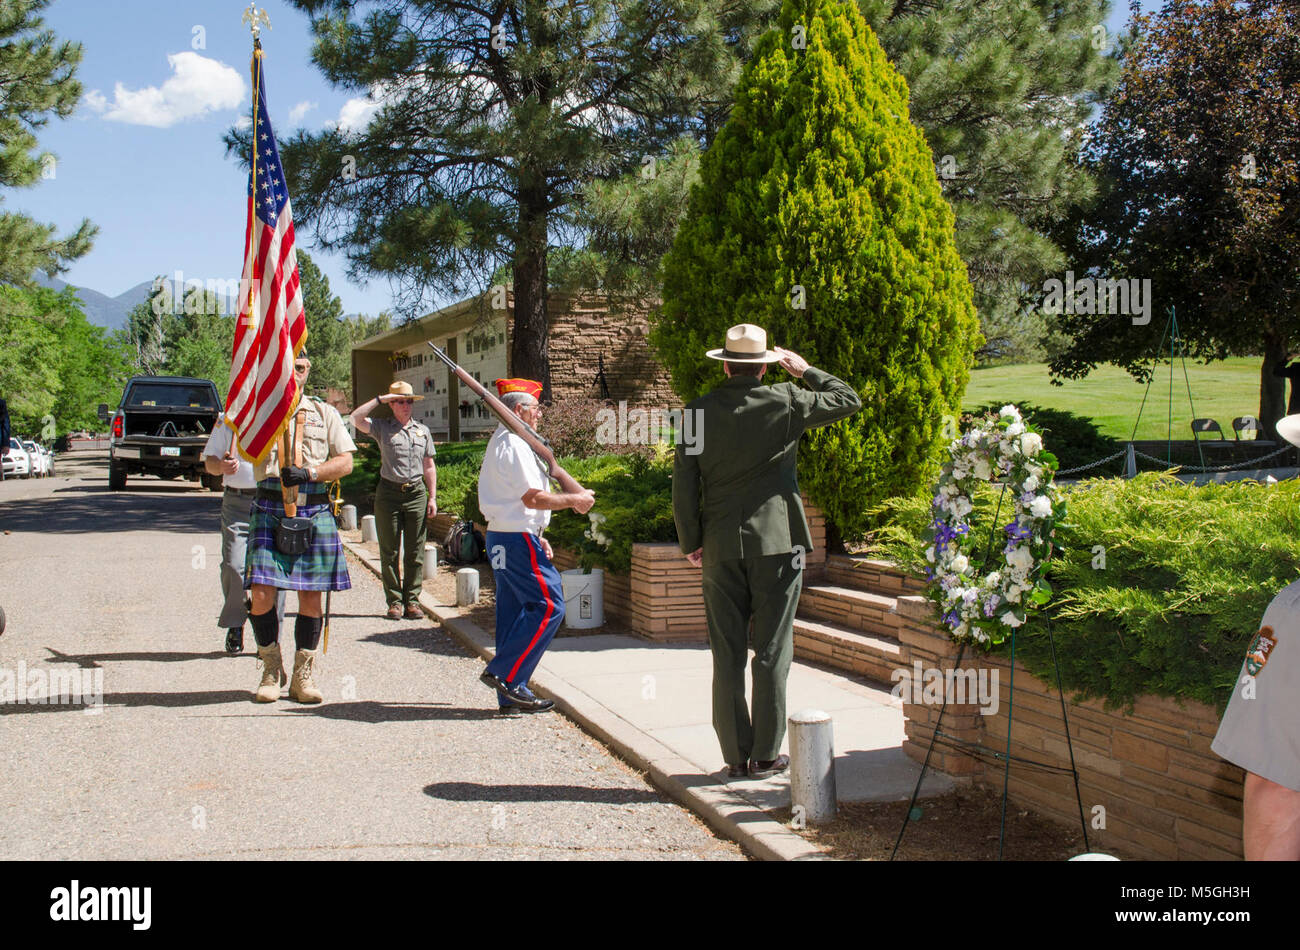 June ,  Wrea laying ceremony - Citizens Cemetery, Flagstaff  Flagstaff American Legion Post 3, the Scottish American Military Society, and Veterans of Foreign Wars Post 1709 posting the colors during the memorial wreath laying ceremony at Citizens Cemetery, Flagstaff, AZ. Stock Photo